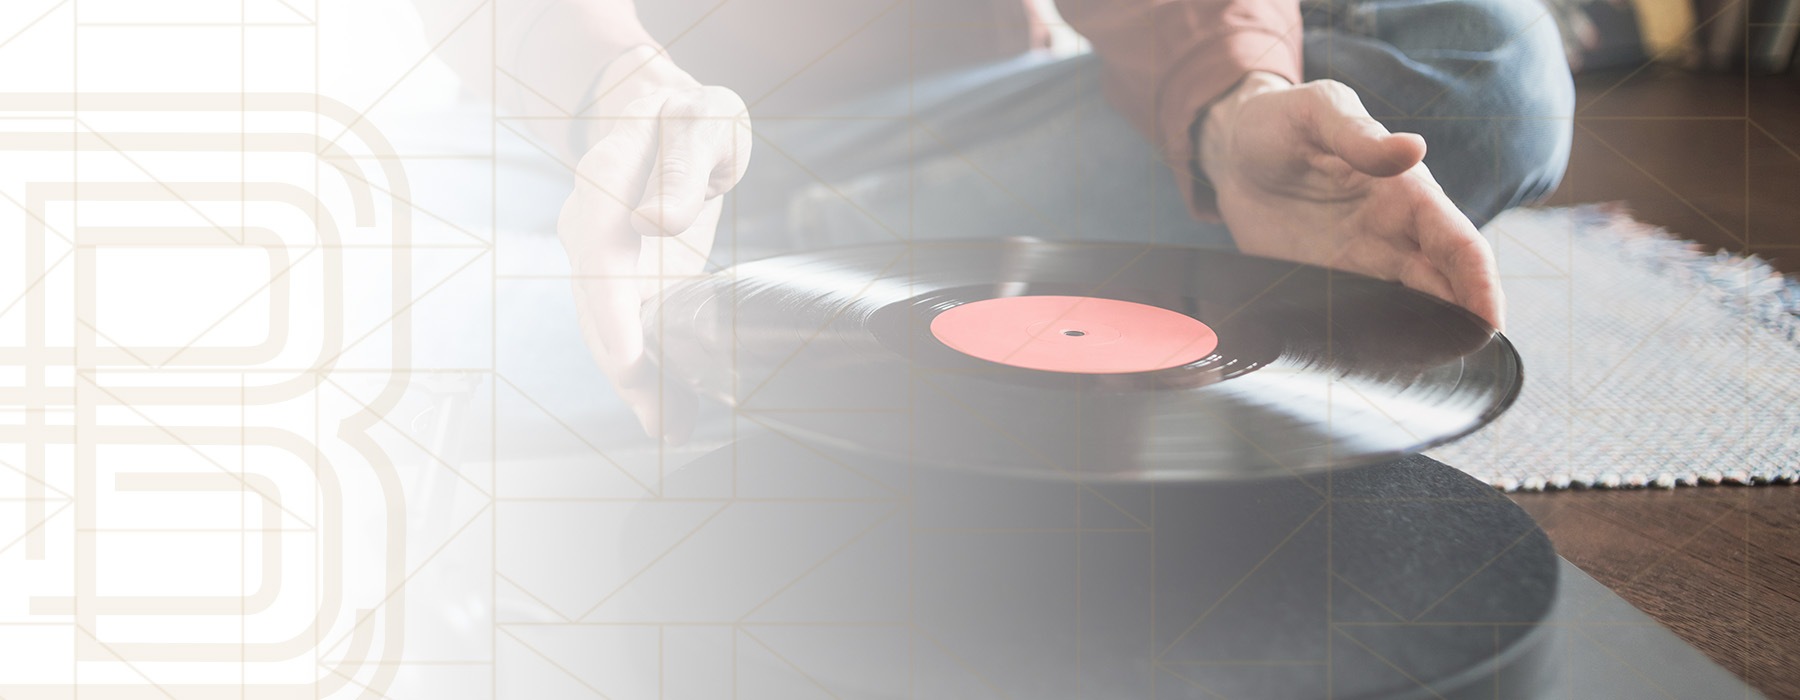 edited image of someone placing a vinyl record onto a record player